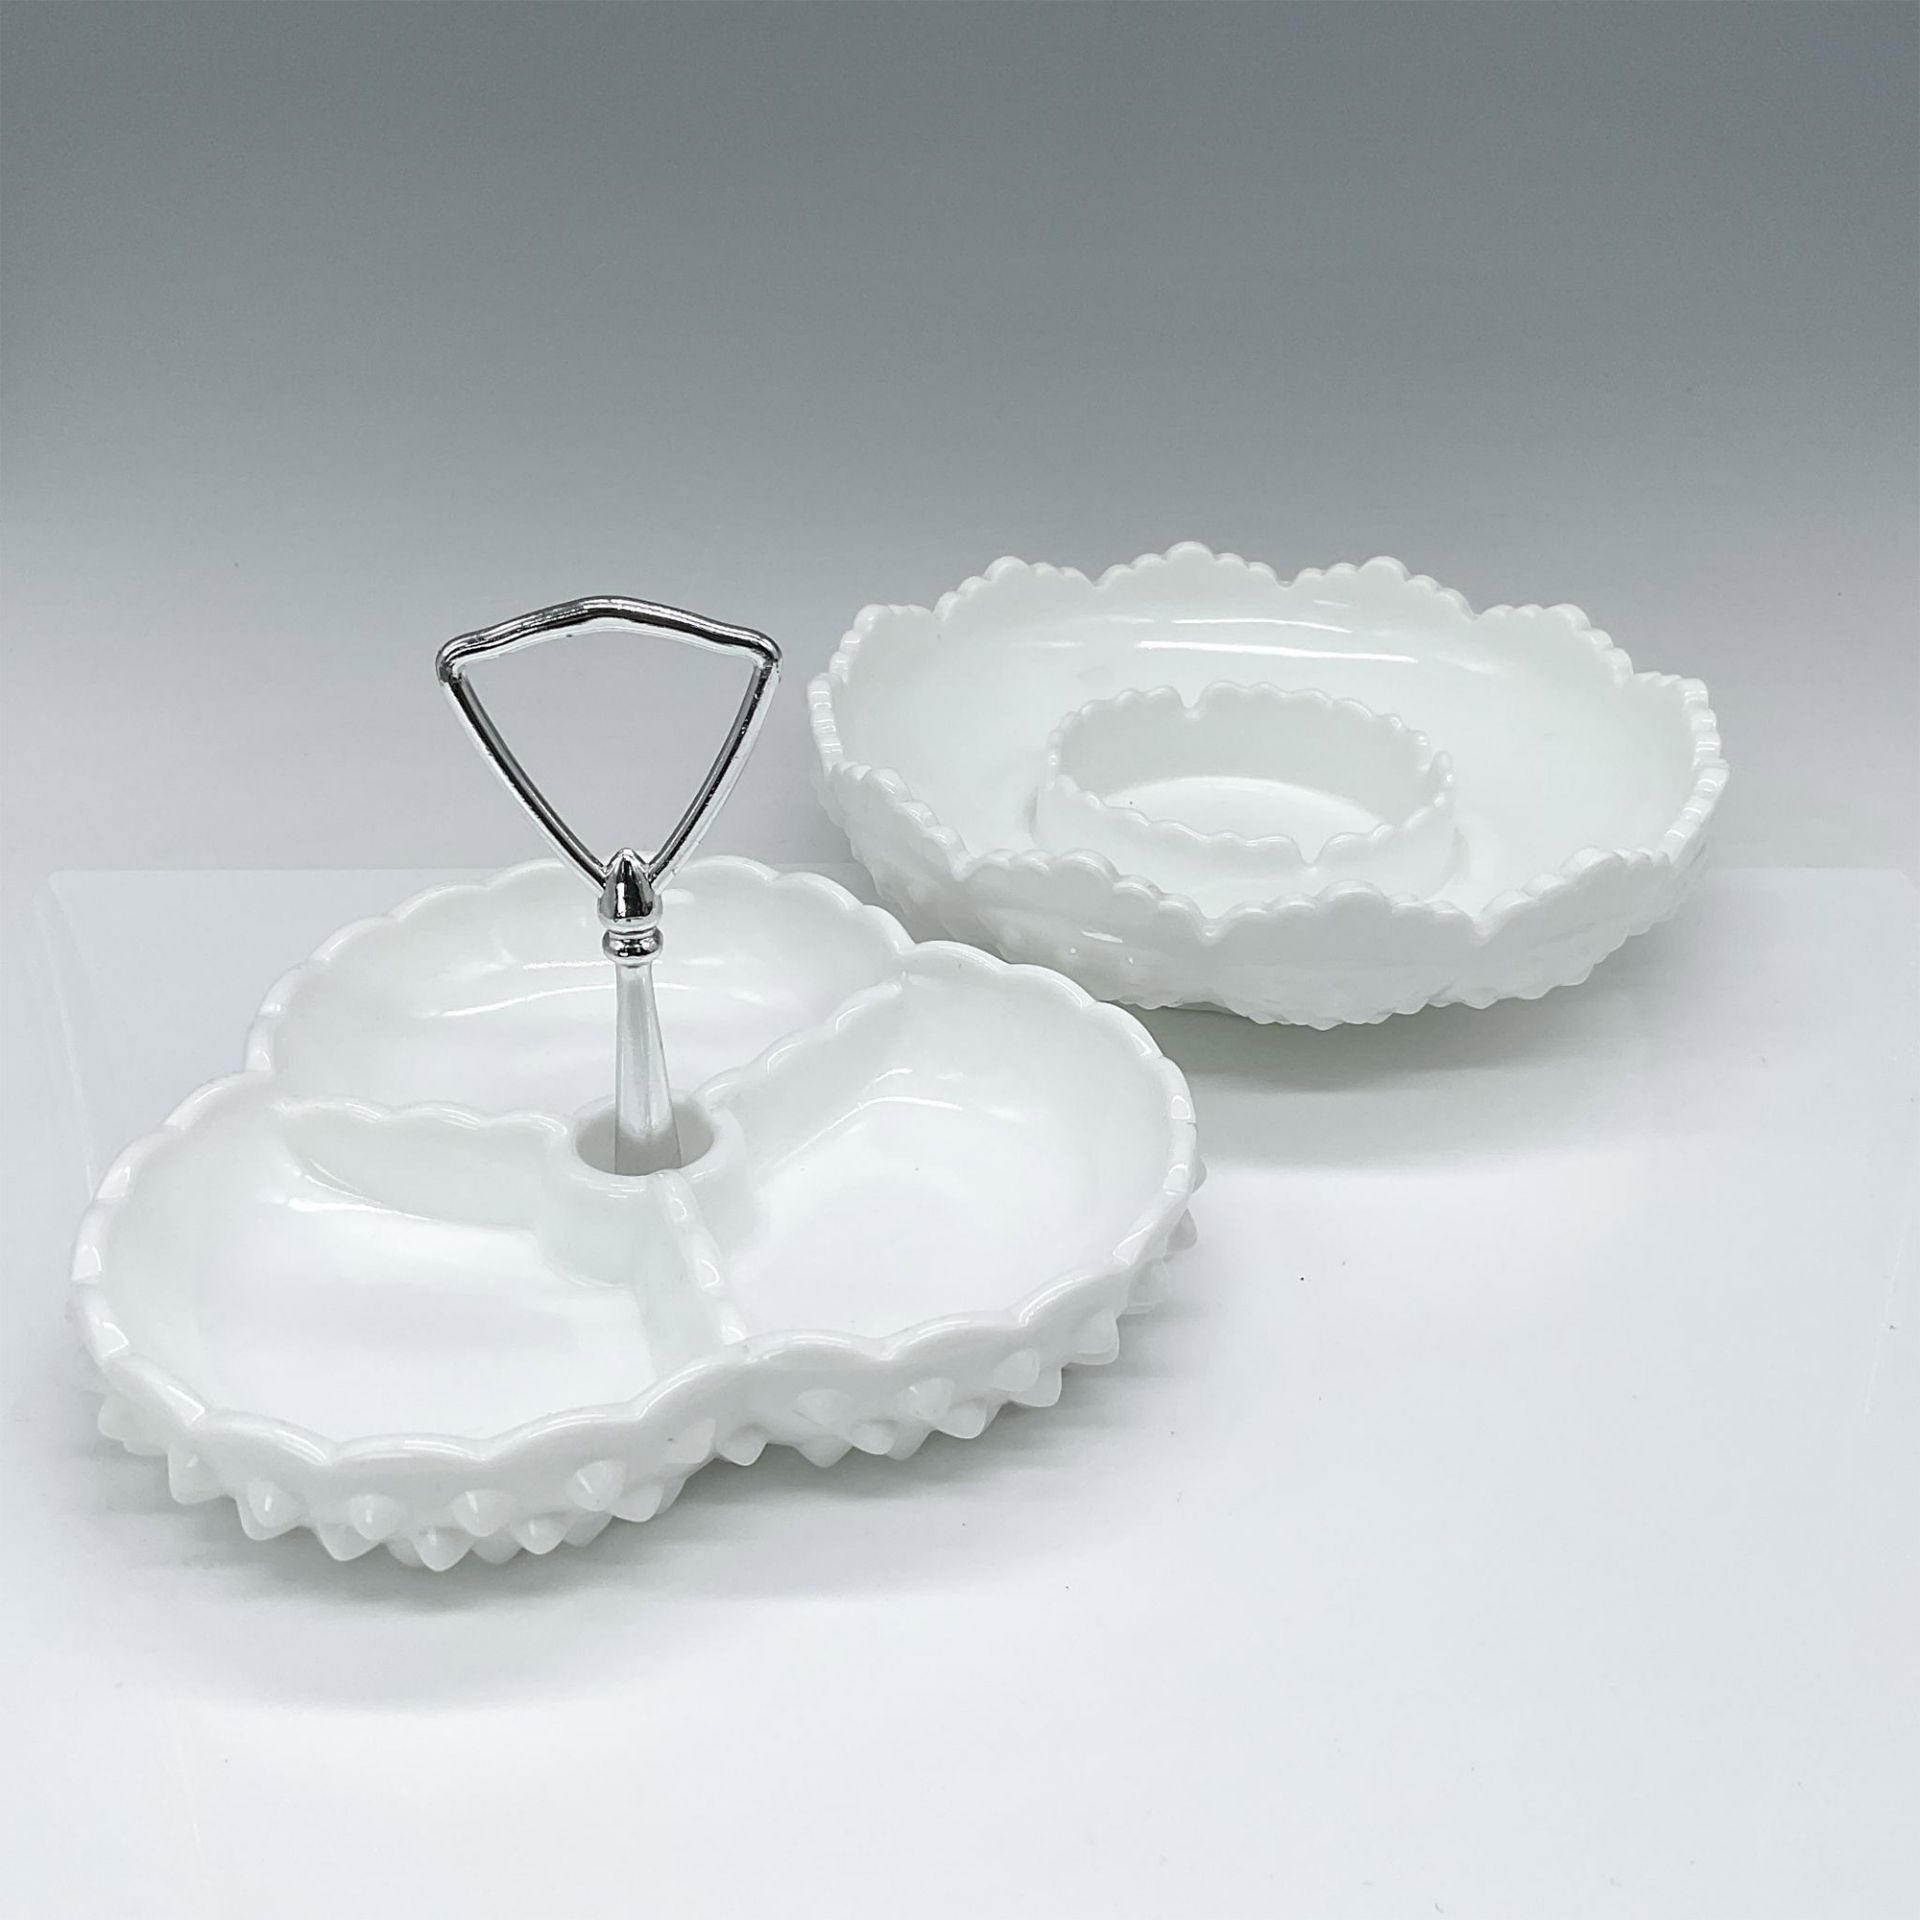 2pc Fenton Hobnail Milk Glass Serving Dishes - Image 2 of 4